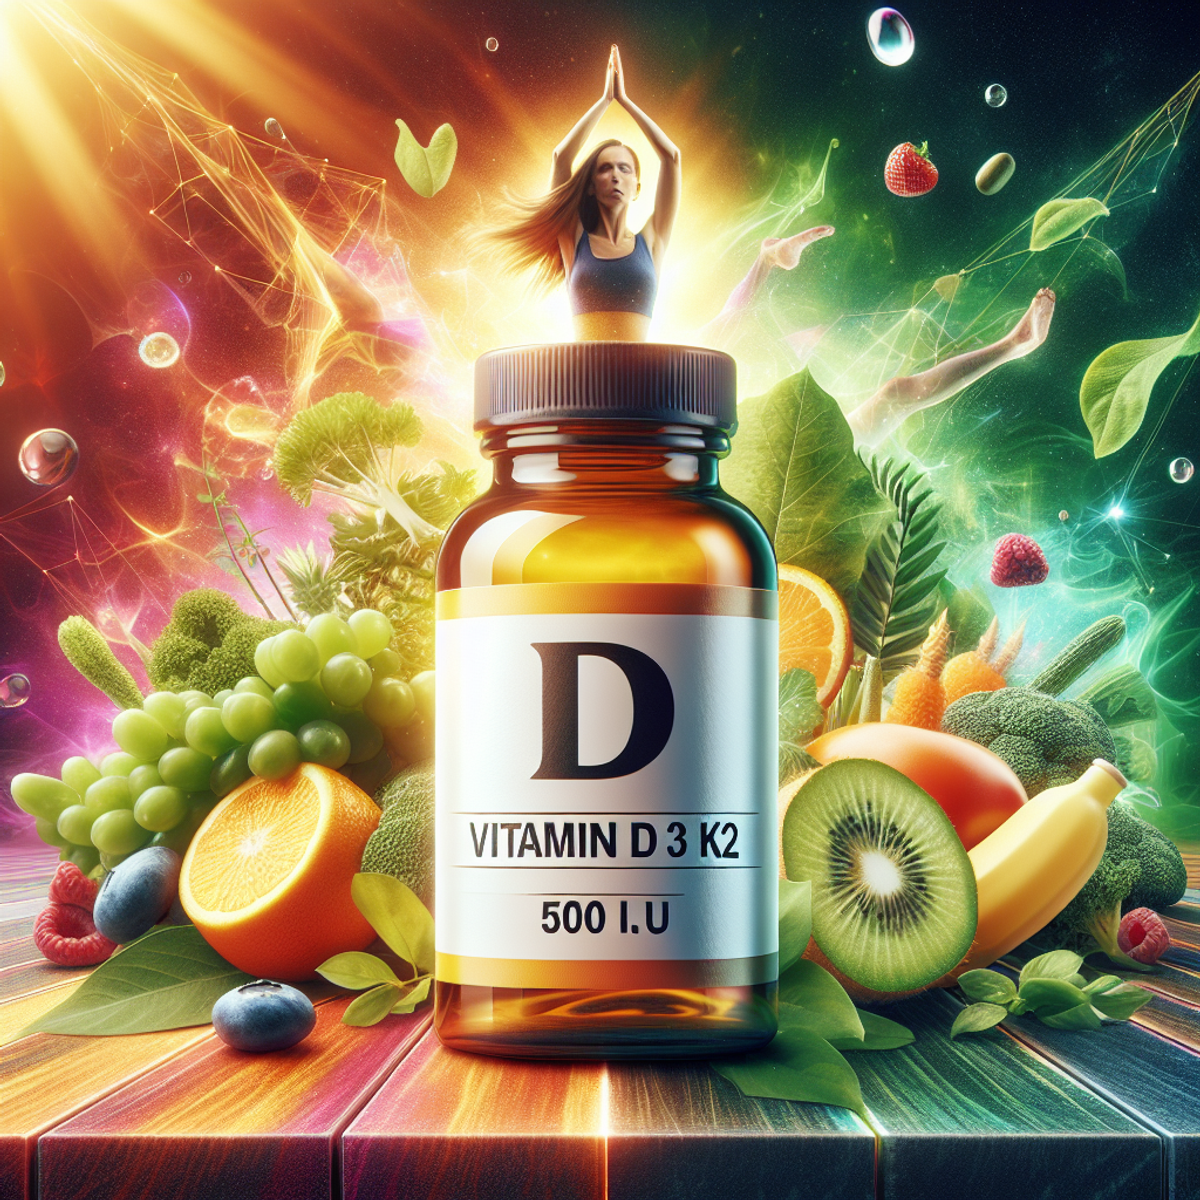 Bottle of Vitamin D3 K2 5000 I.U. with a sun symbol on the label, surrounded by vibrant fruits and vegetables, representing health and vitality.